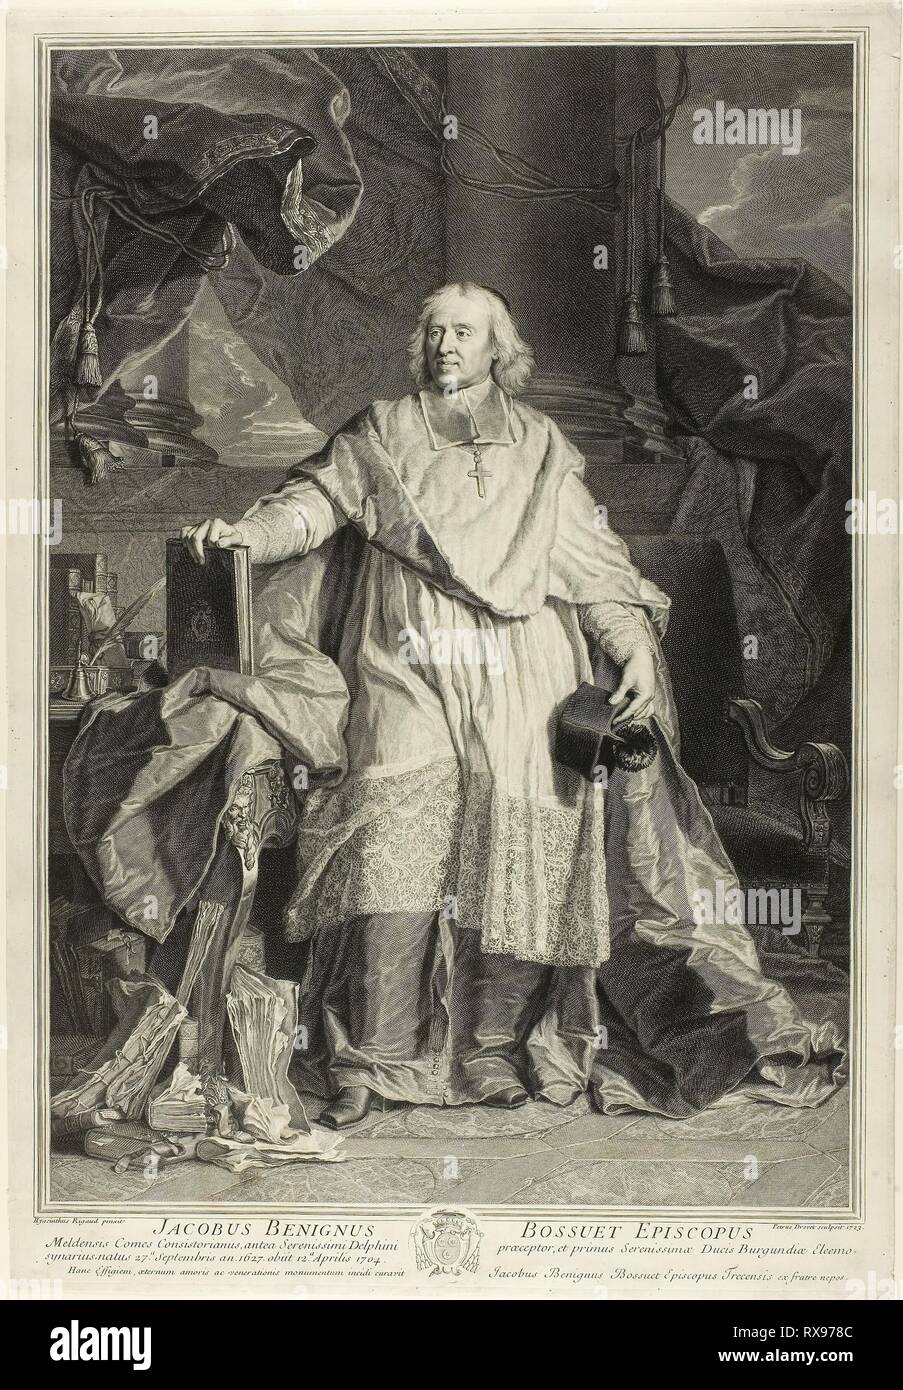 Portrait of Jacques Bénigne Bossuet, Bishop of Meaux. Pierre-Imbert Drevet (French, 1697-1739); after Hyacinthe Rigaud (French, 1659-1743). Date: 1723. Dimensions: 508 × 333 mm (image); 511 × 351 mm (plate); 519 × 357 mm (sheet). Engraving on ivory laid paper. Origin: France. Museum: The Chicago Art Institute. Stock Photo